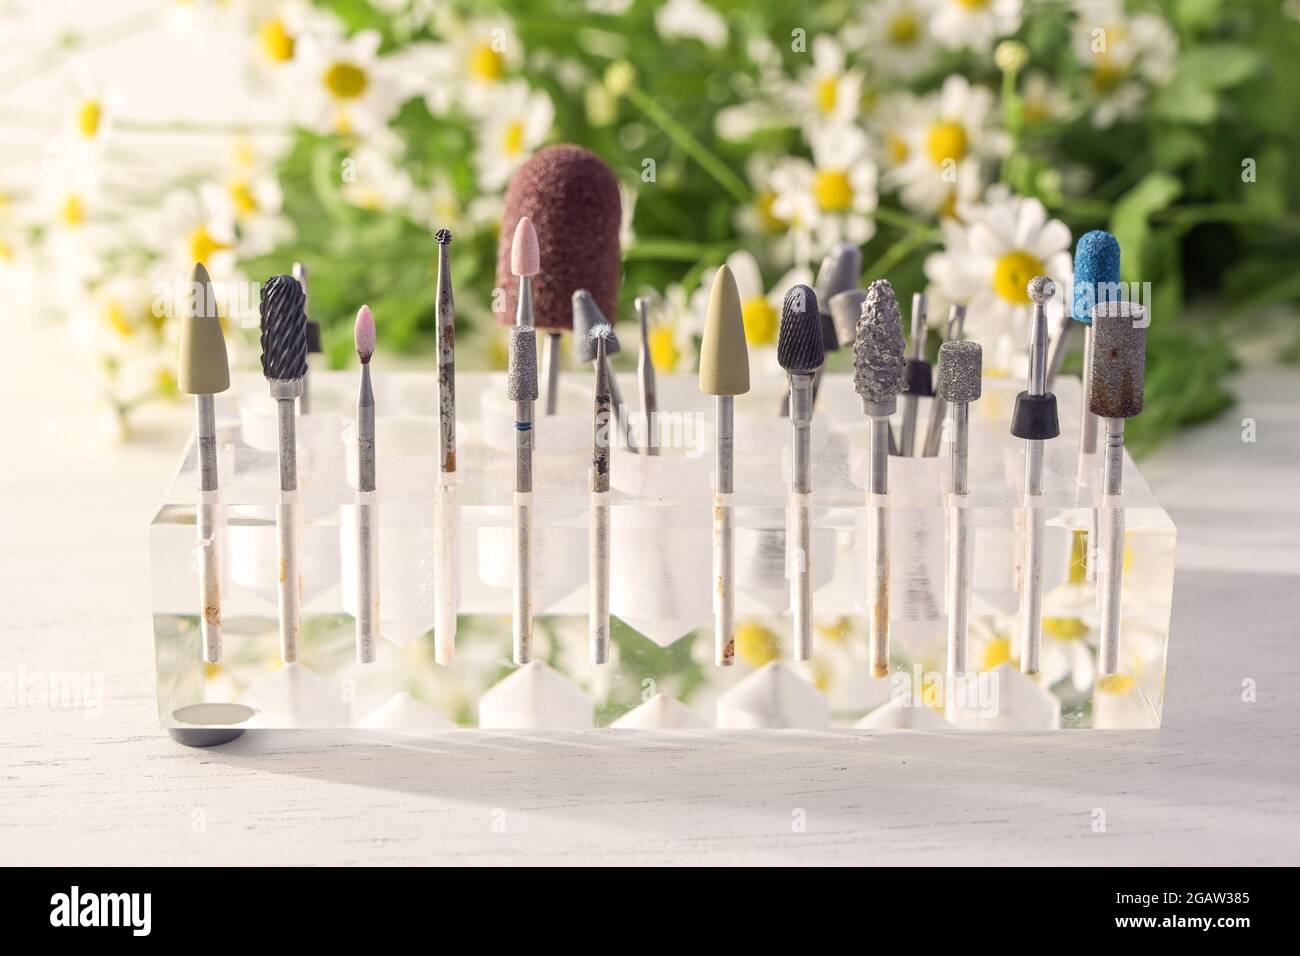 grinding and polishing attachments for cosmetic treatments such as manicure and pedicure in a transparent holder, blurry flowers in the background, se Stock Photo